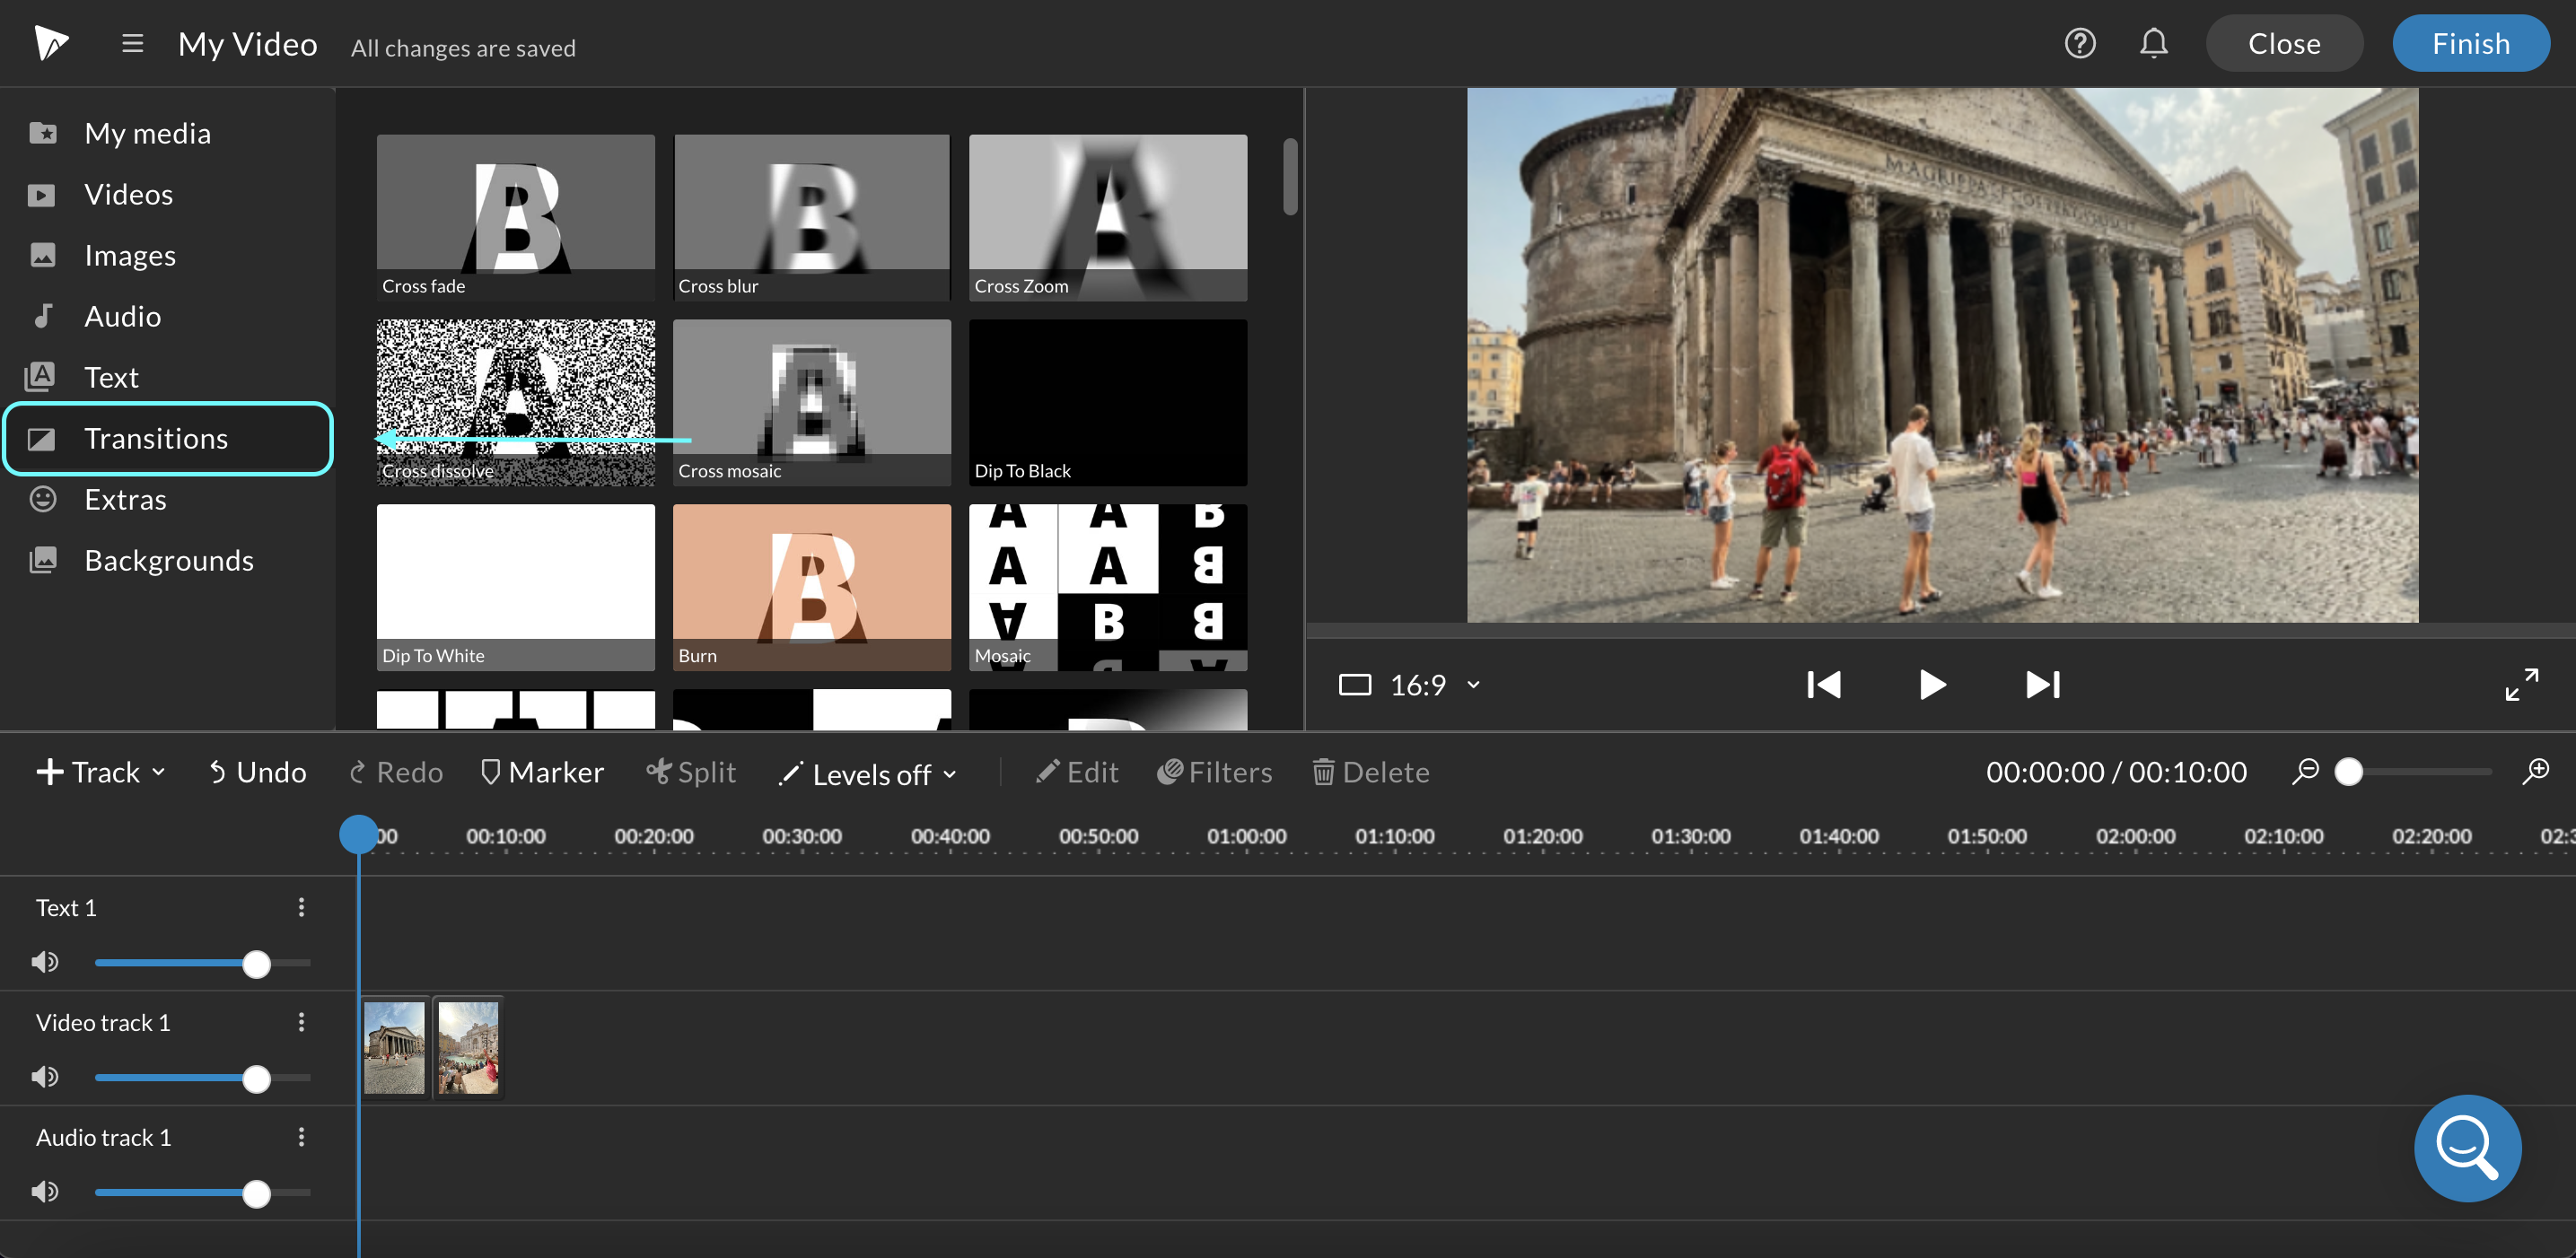 Blue arrow pointing towards the "Transitions" tab in the WeVideo timeline editor.